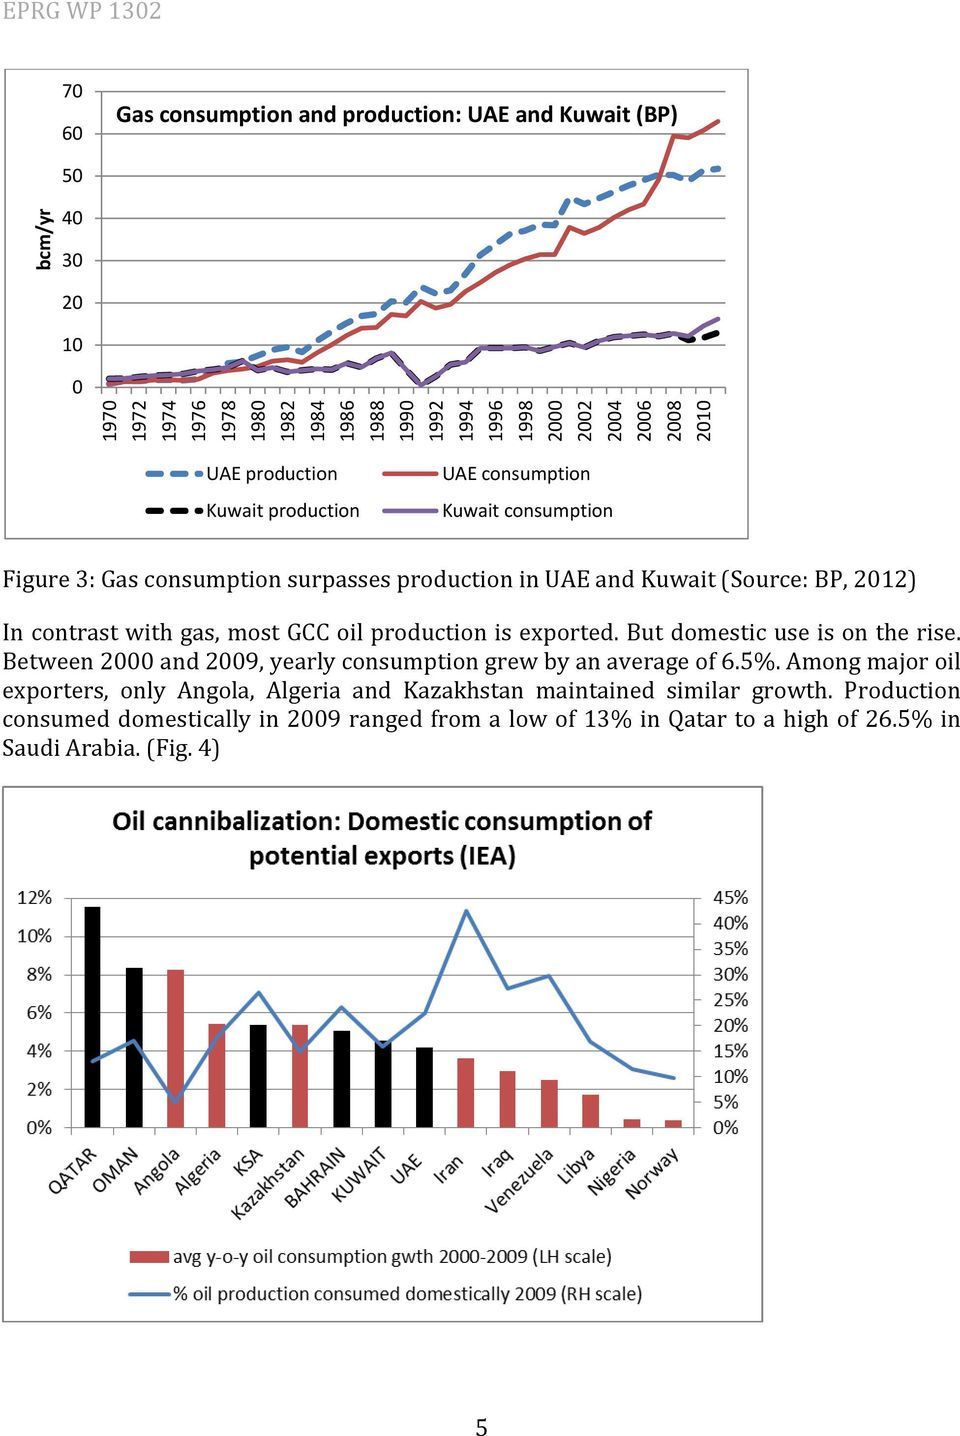 with gas, most GCC oil production is exported. But domestic use is on the rise. Between 2000 and 2009, yearly consumption grew by an average of 6.5%.